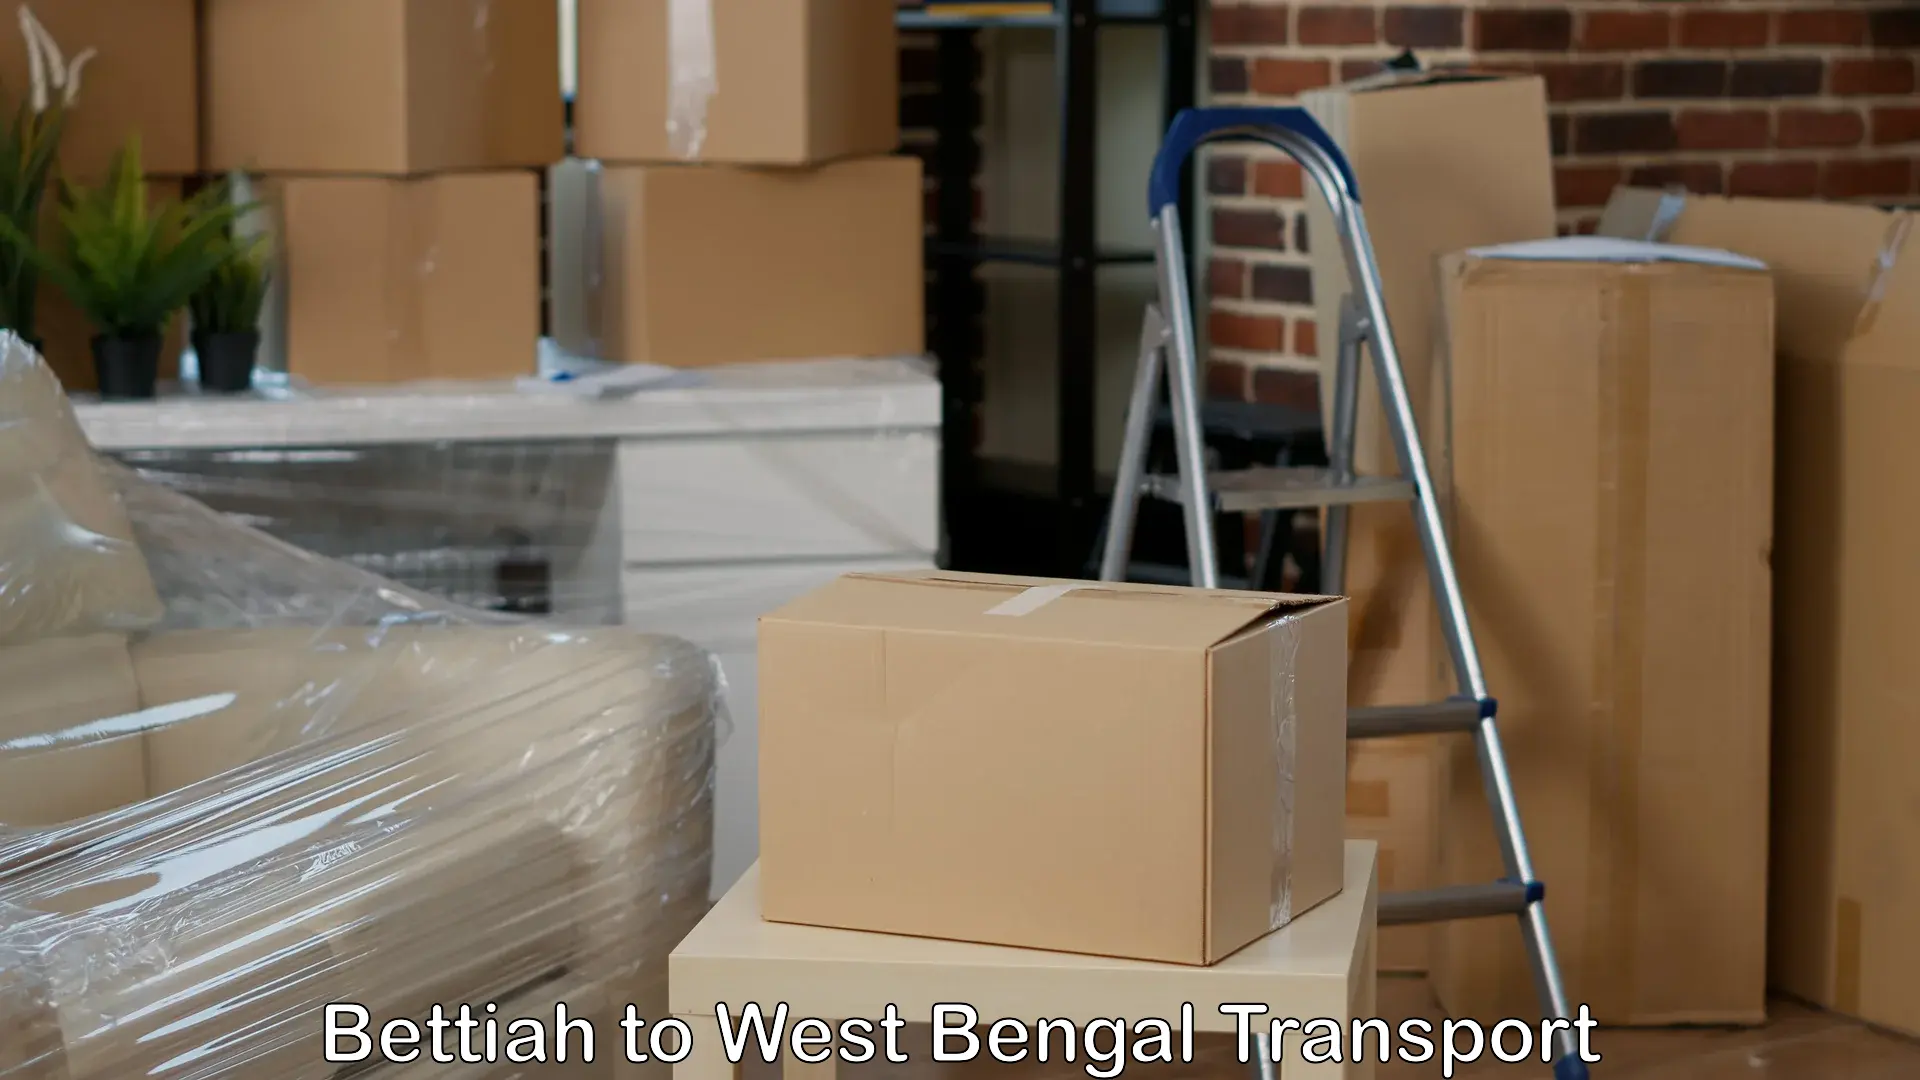 Truck transport companies in India Bettiah to Madhyamgram